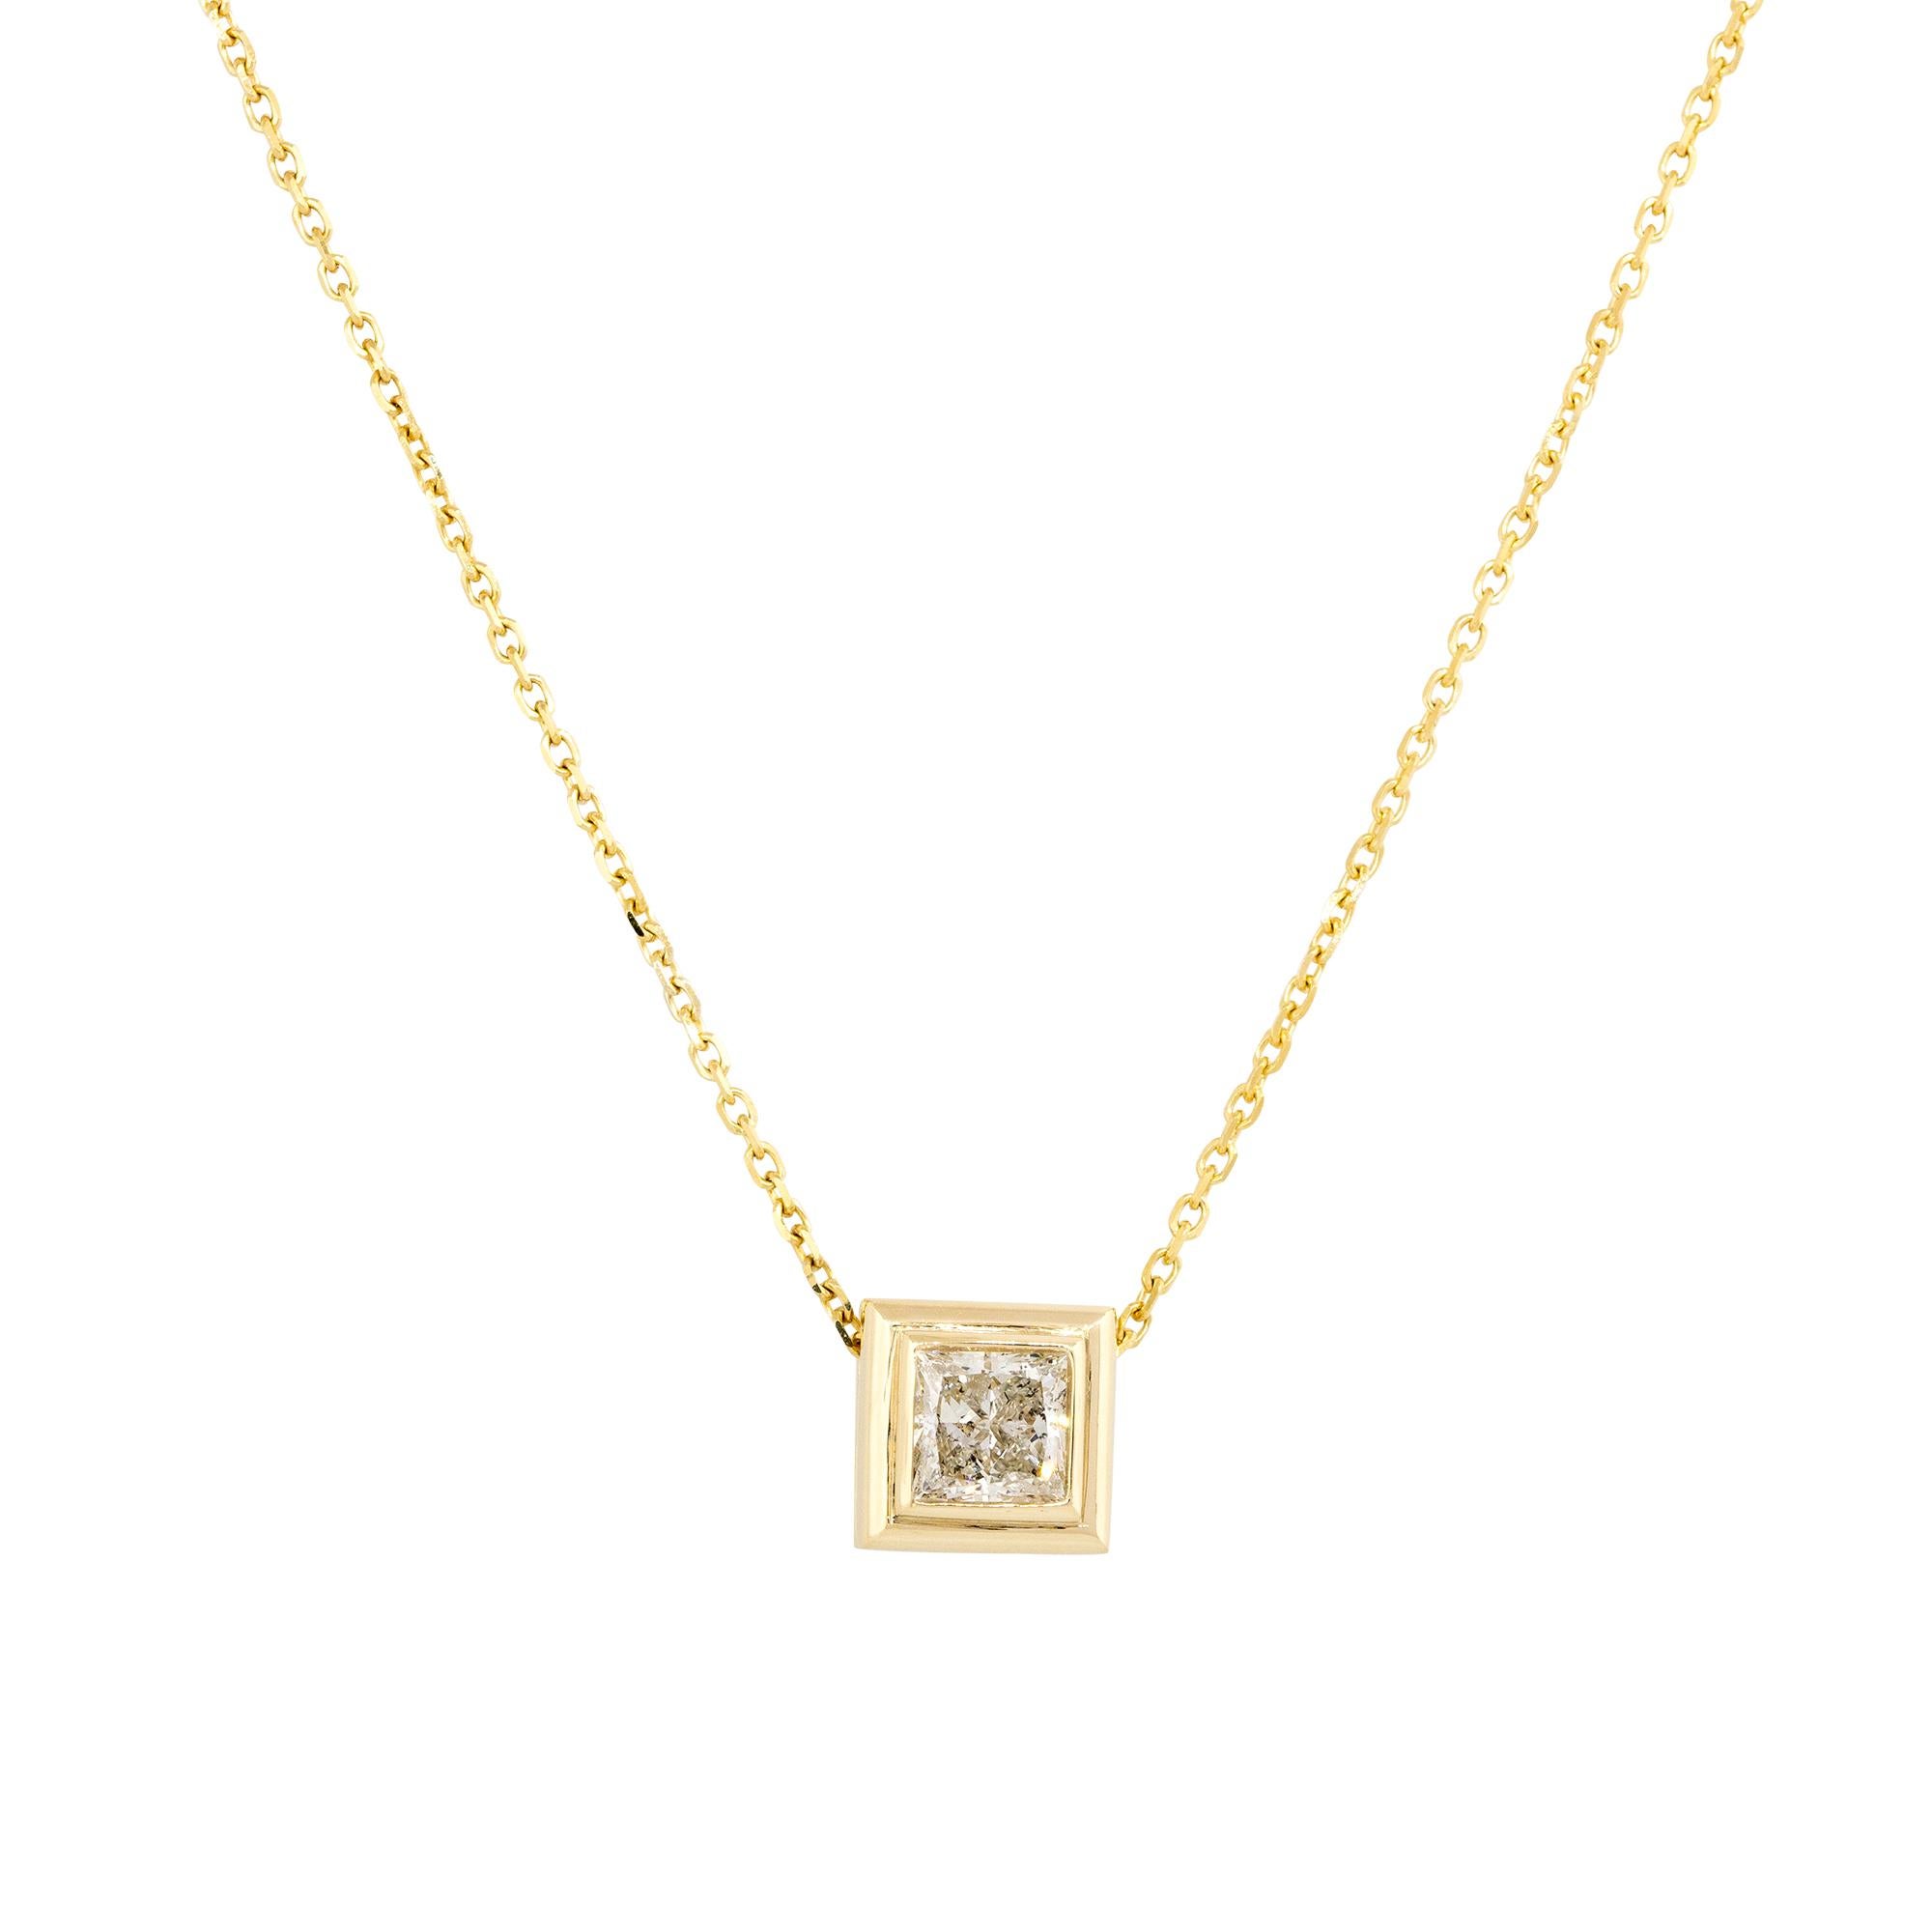 0.99 Carat Princess Cut Floating Diamond Necklace 14 Karat In Stock In Excellent Condition For Sale In Boca Raton, FL